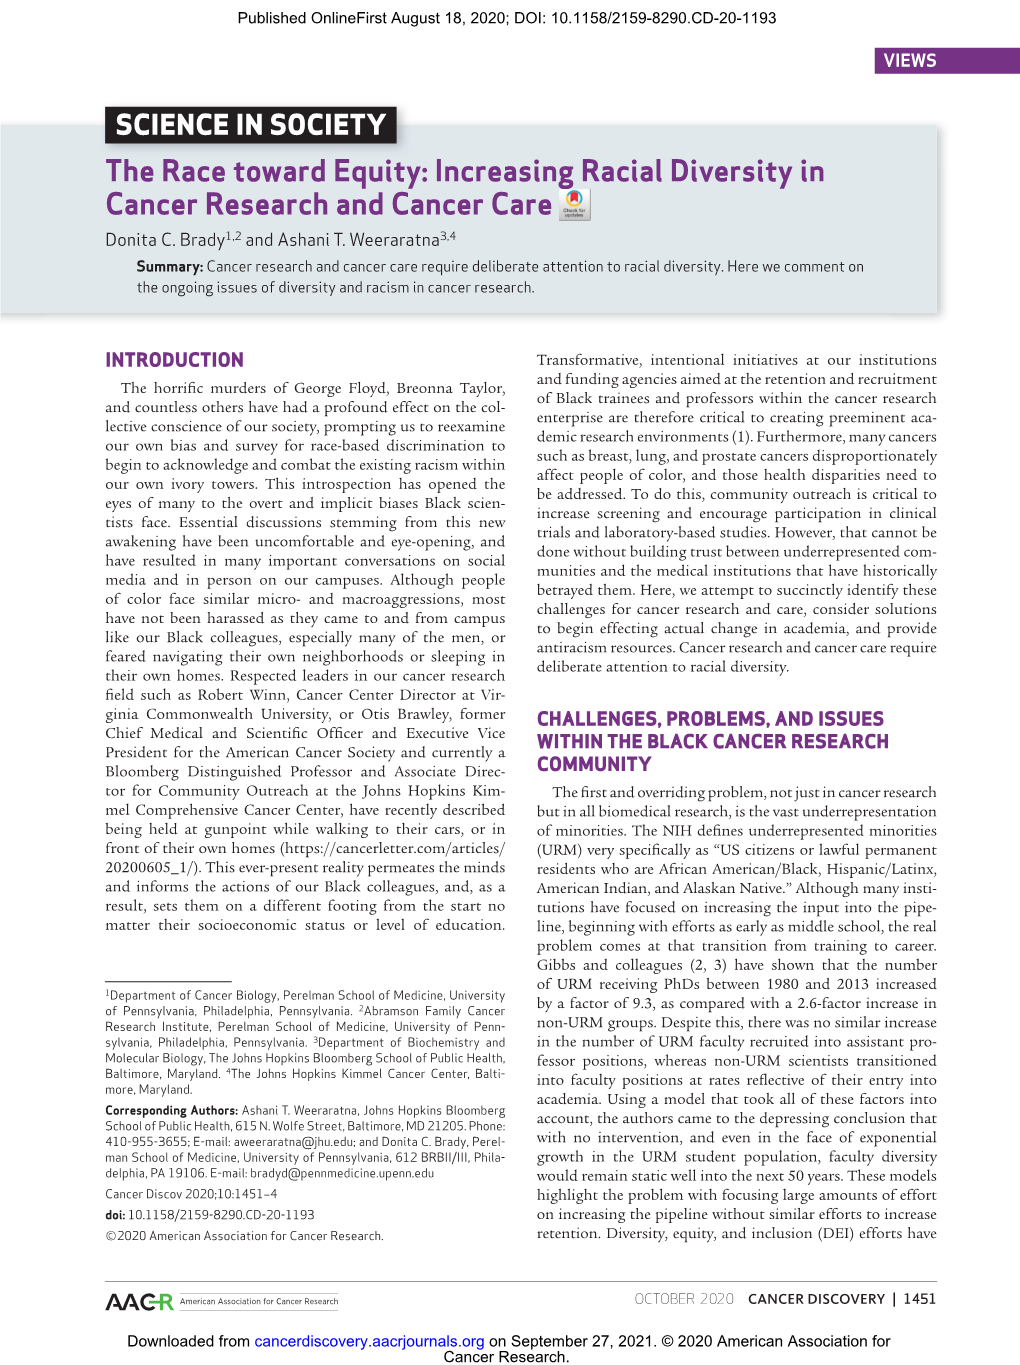 Increasing Racial Diversity in Cancer Research and Cancer Care Donita C